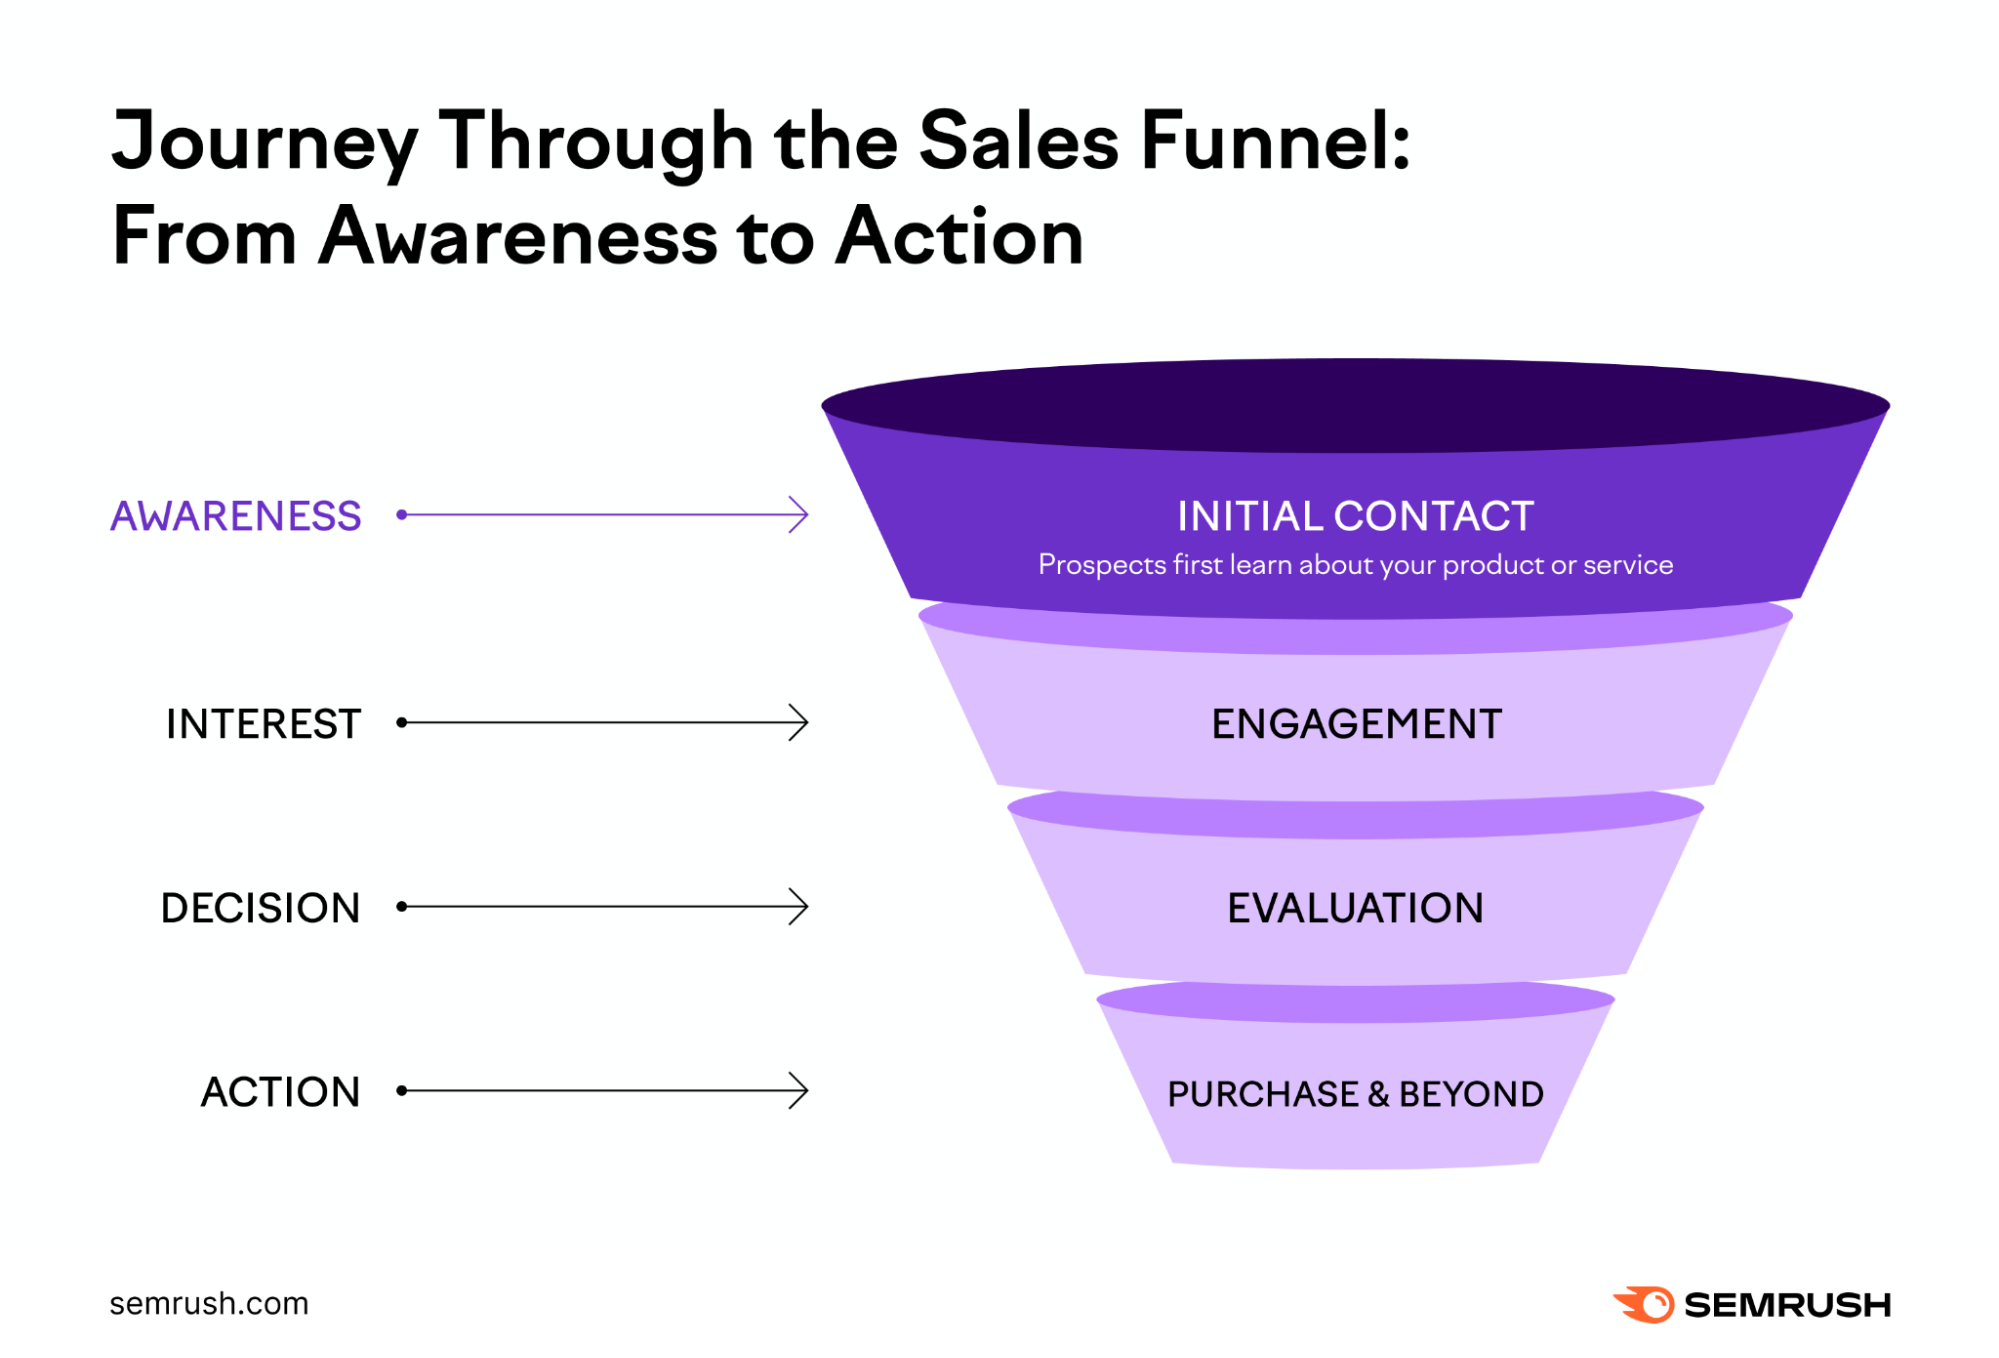 An infographic showing a sales funnel: from awareness to action, with "awareness" highlighted